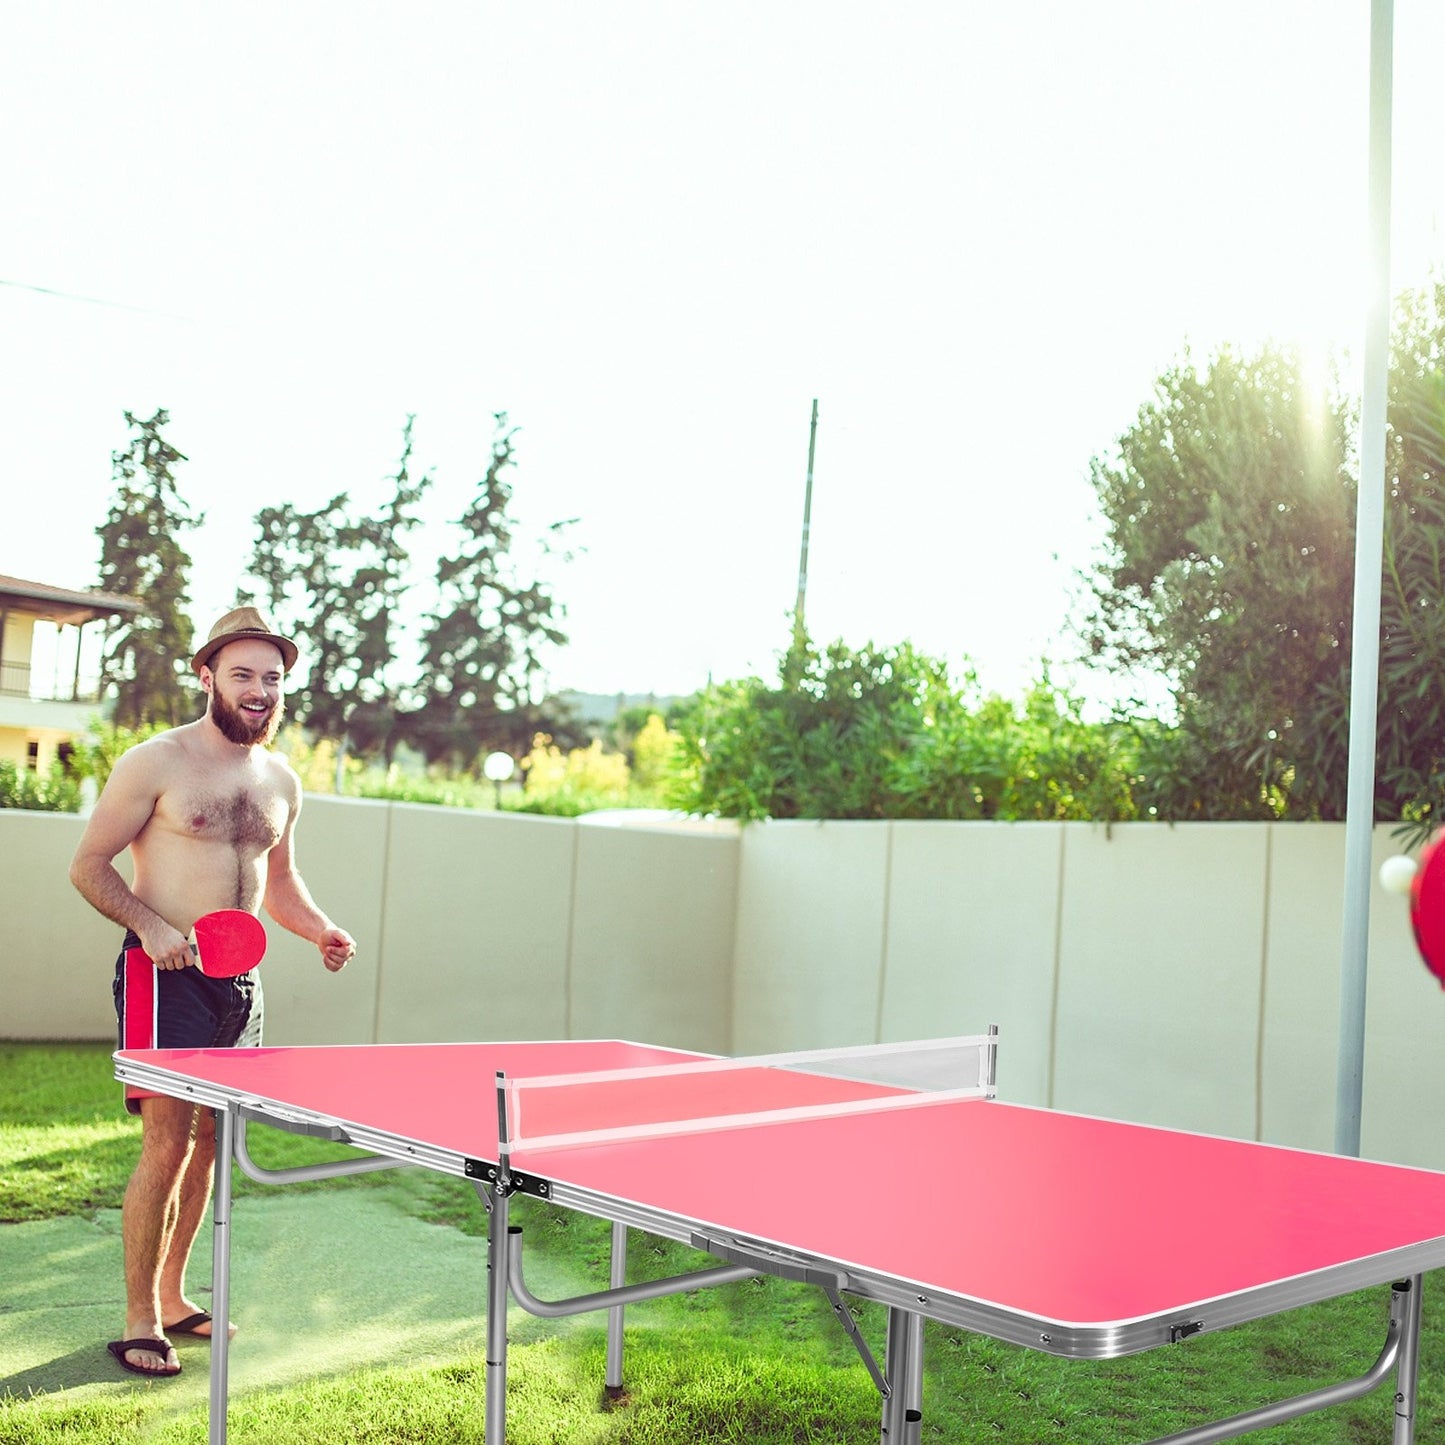 60 Inch Portable Tennis Ping Pong Folding Table with Accessories, Red at Gallery Canada